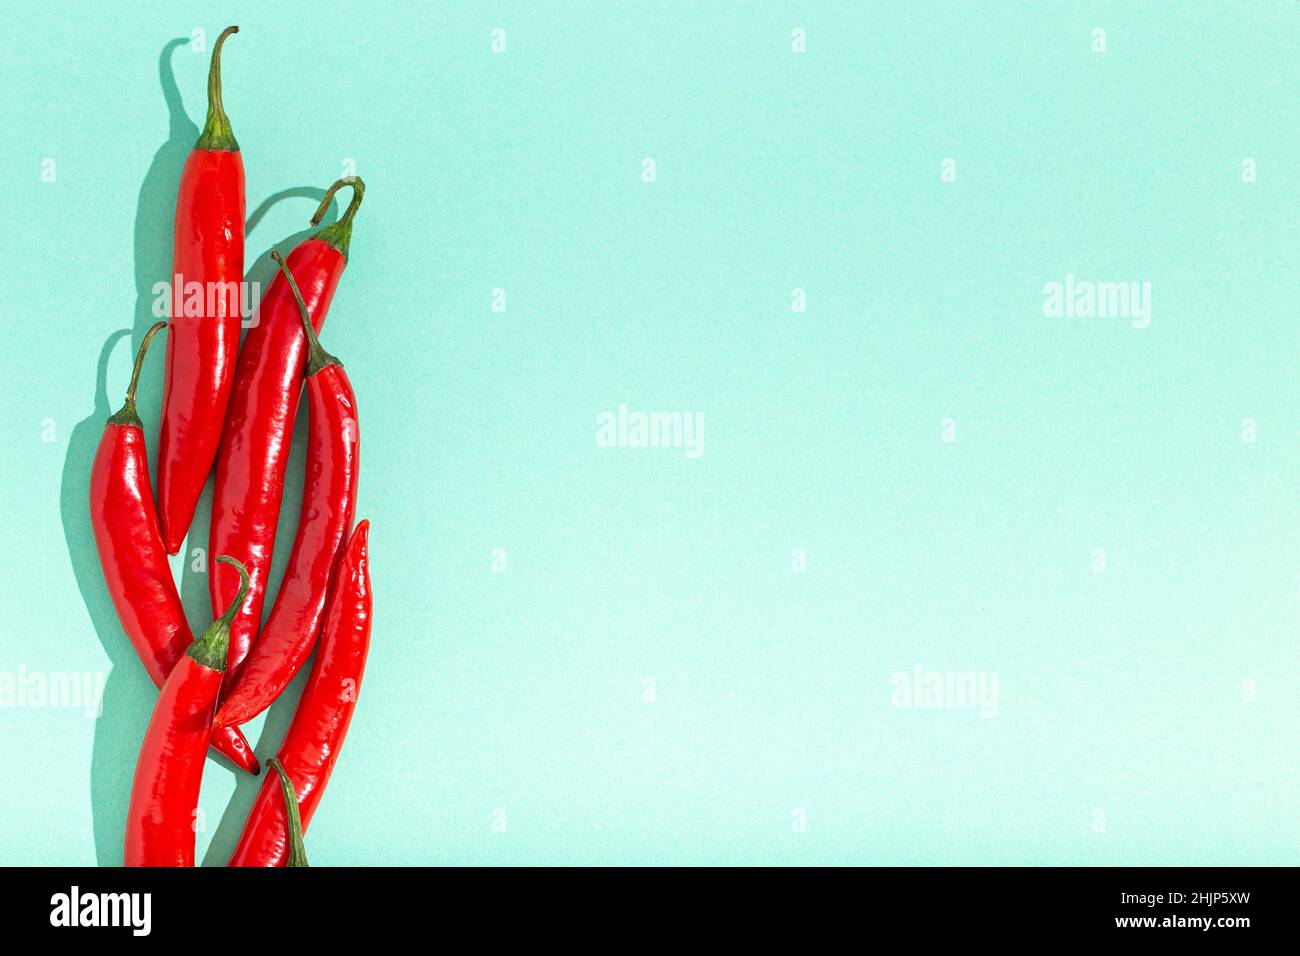 Red hot chilli peppers on minimal blue contrast background Stock Photo